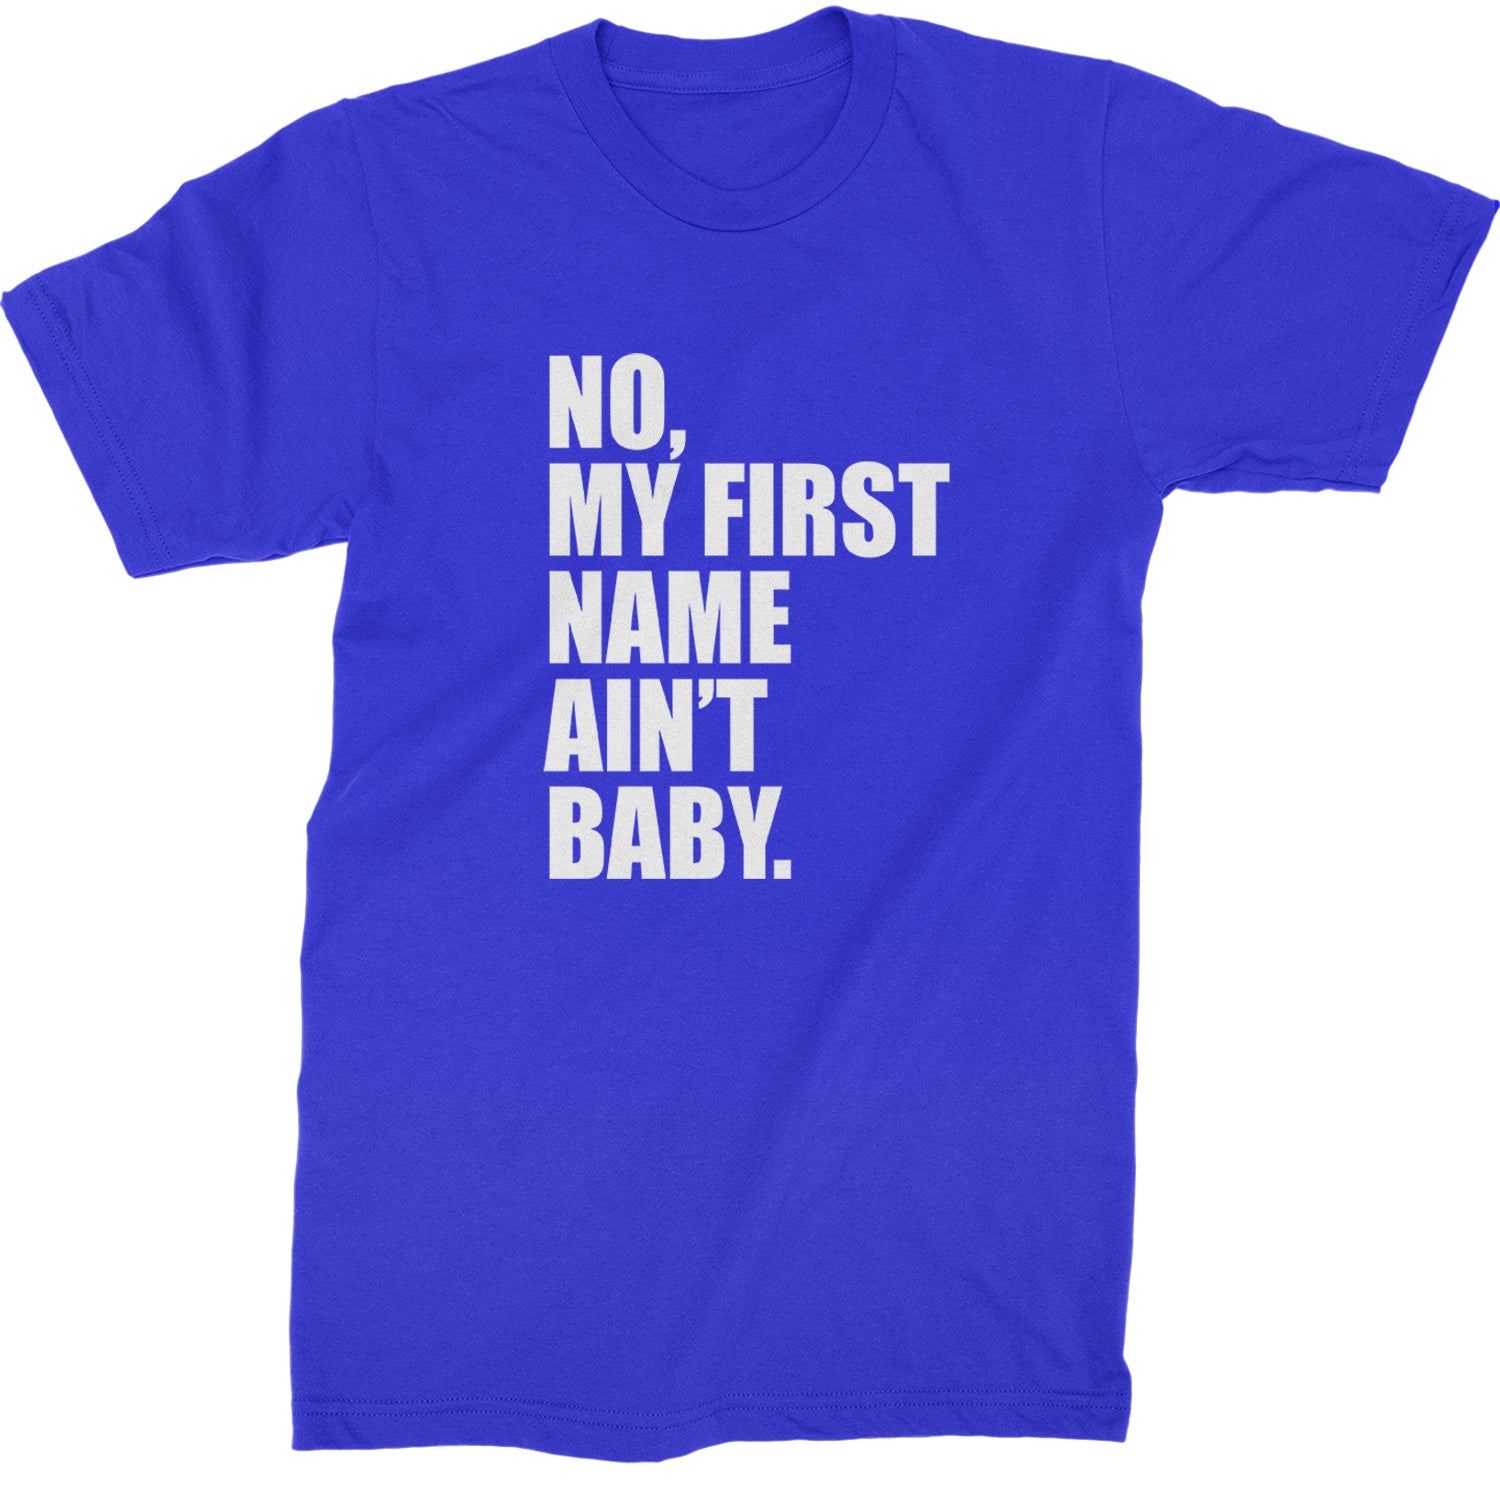 No My First Name Ain't Baby Together Again Mens T-shirt Royal Blue